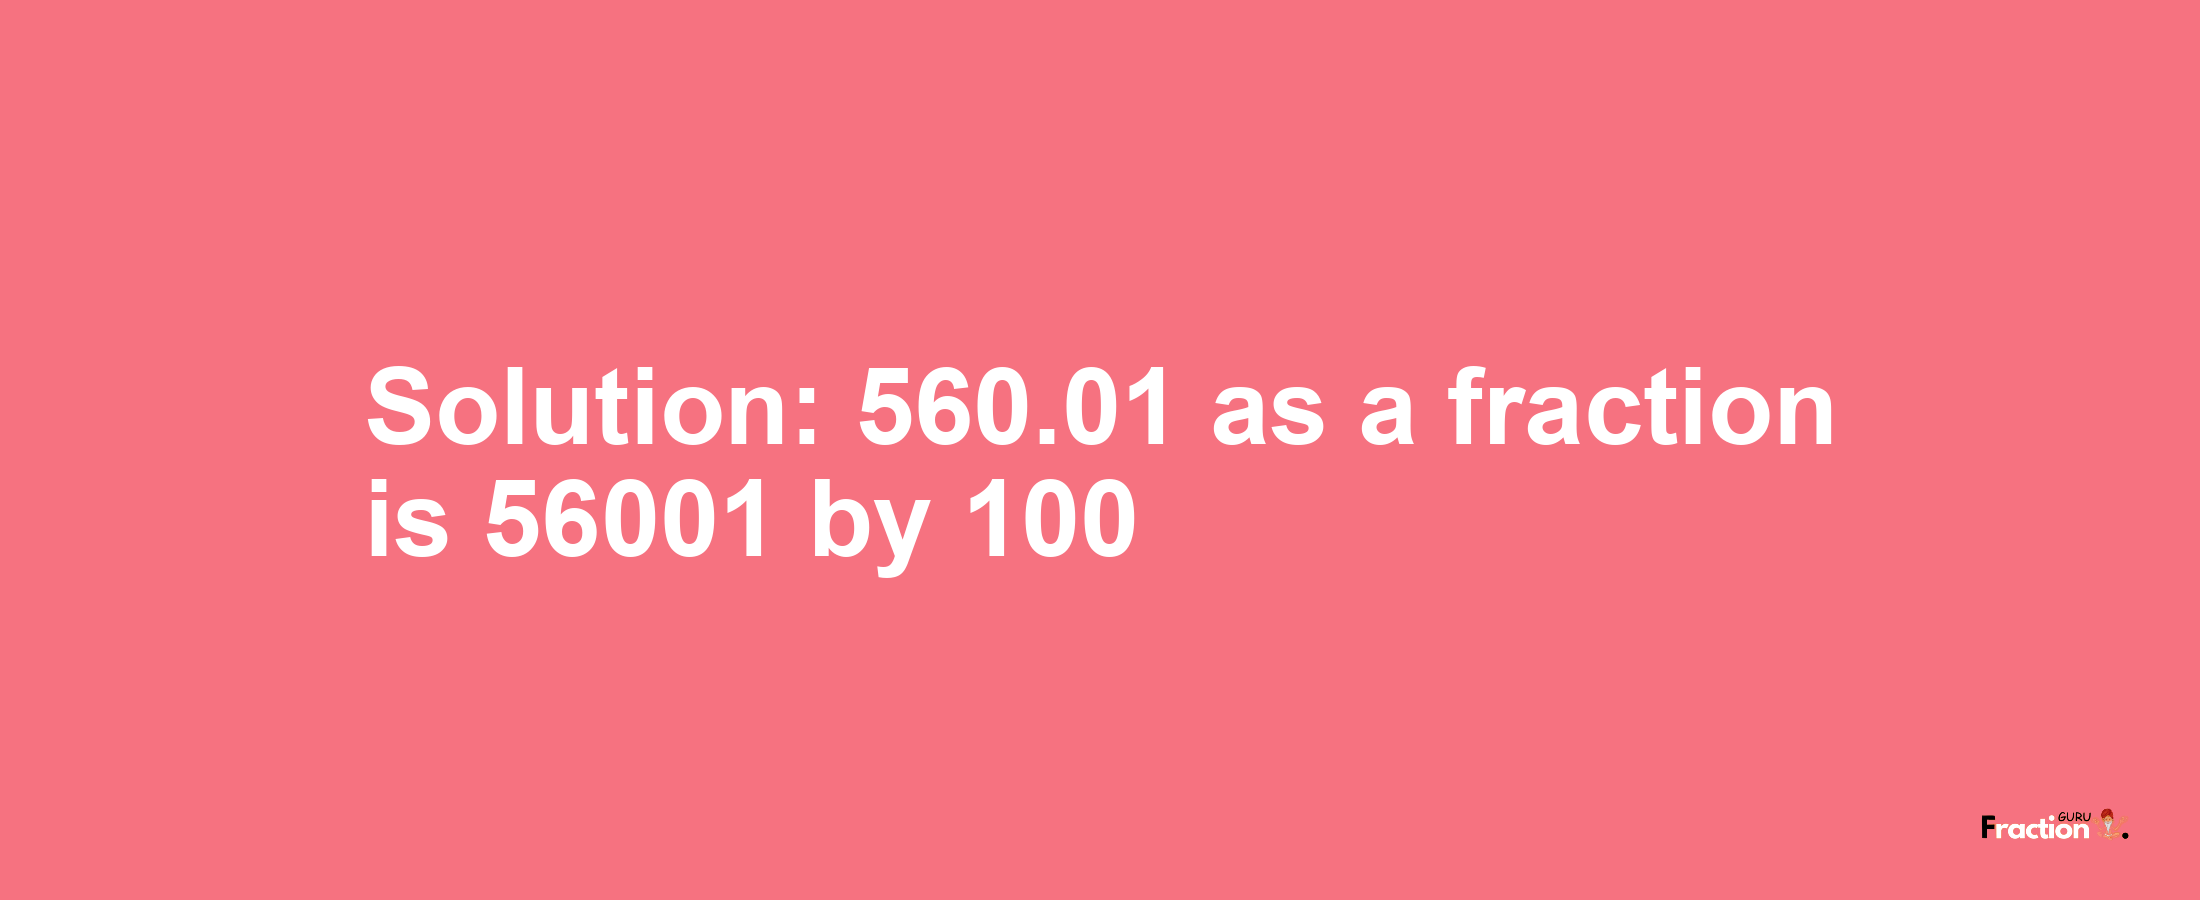 Solution:560.01 as a fraction is 56001/100